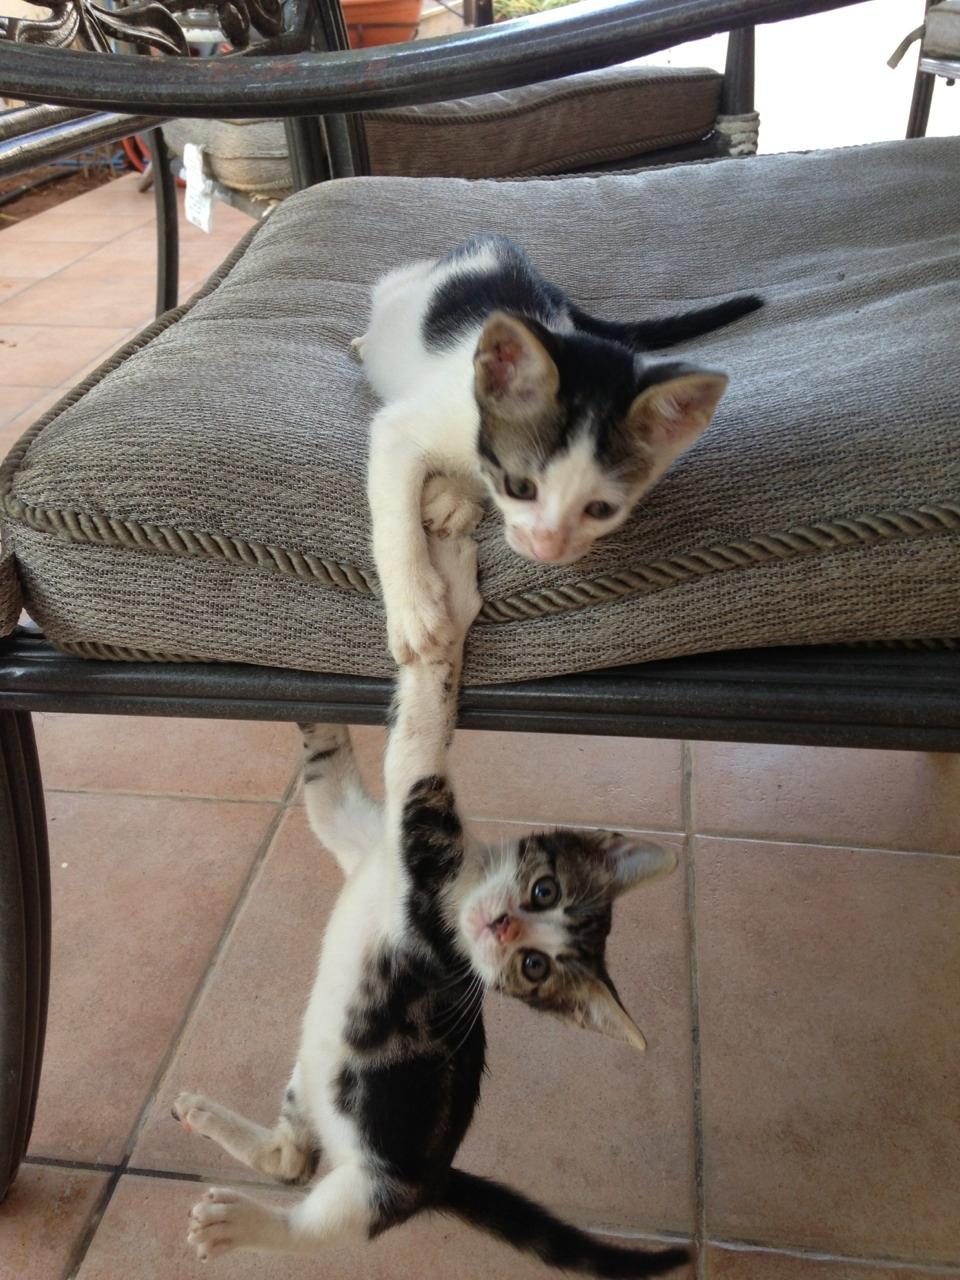 These Kittens Reenacting The Lion King Is The Cutest Thing